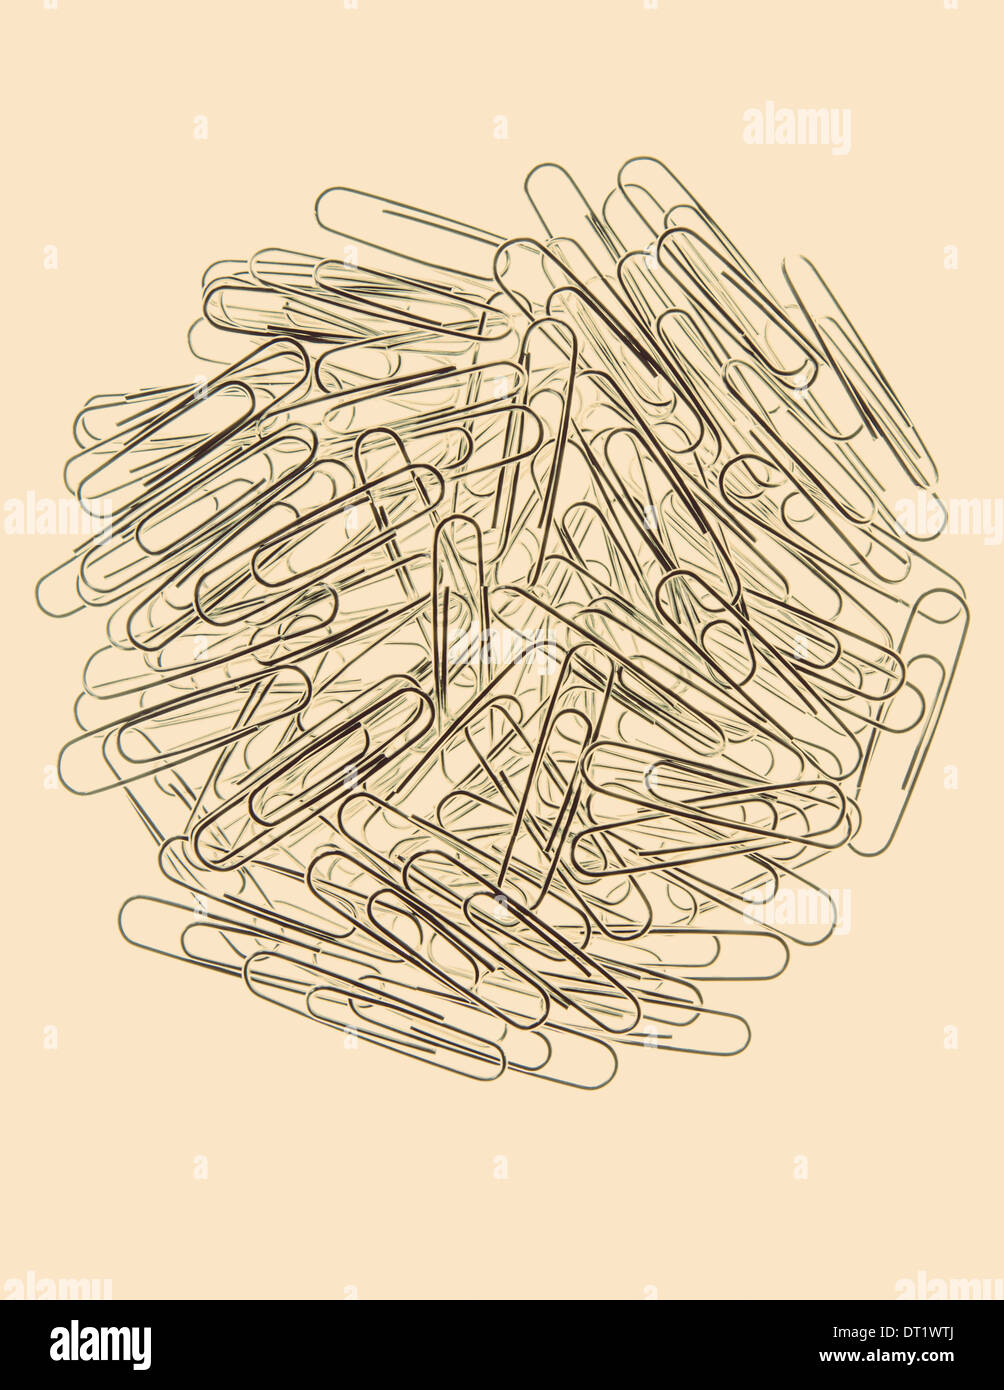 A large group of metal paperclips on a pale background Stock Photo